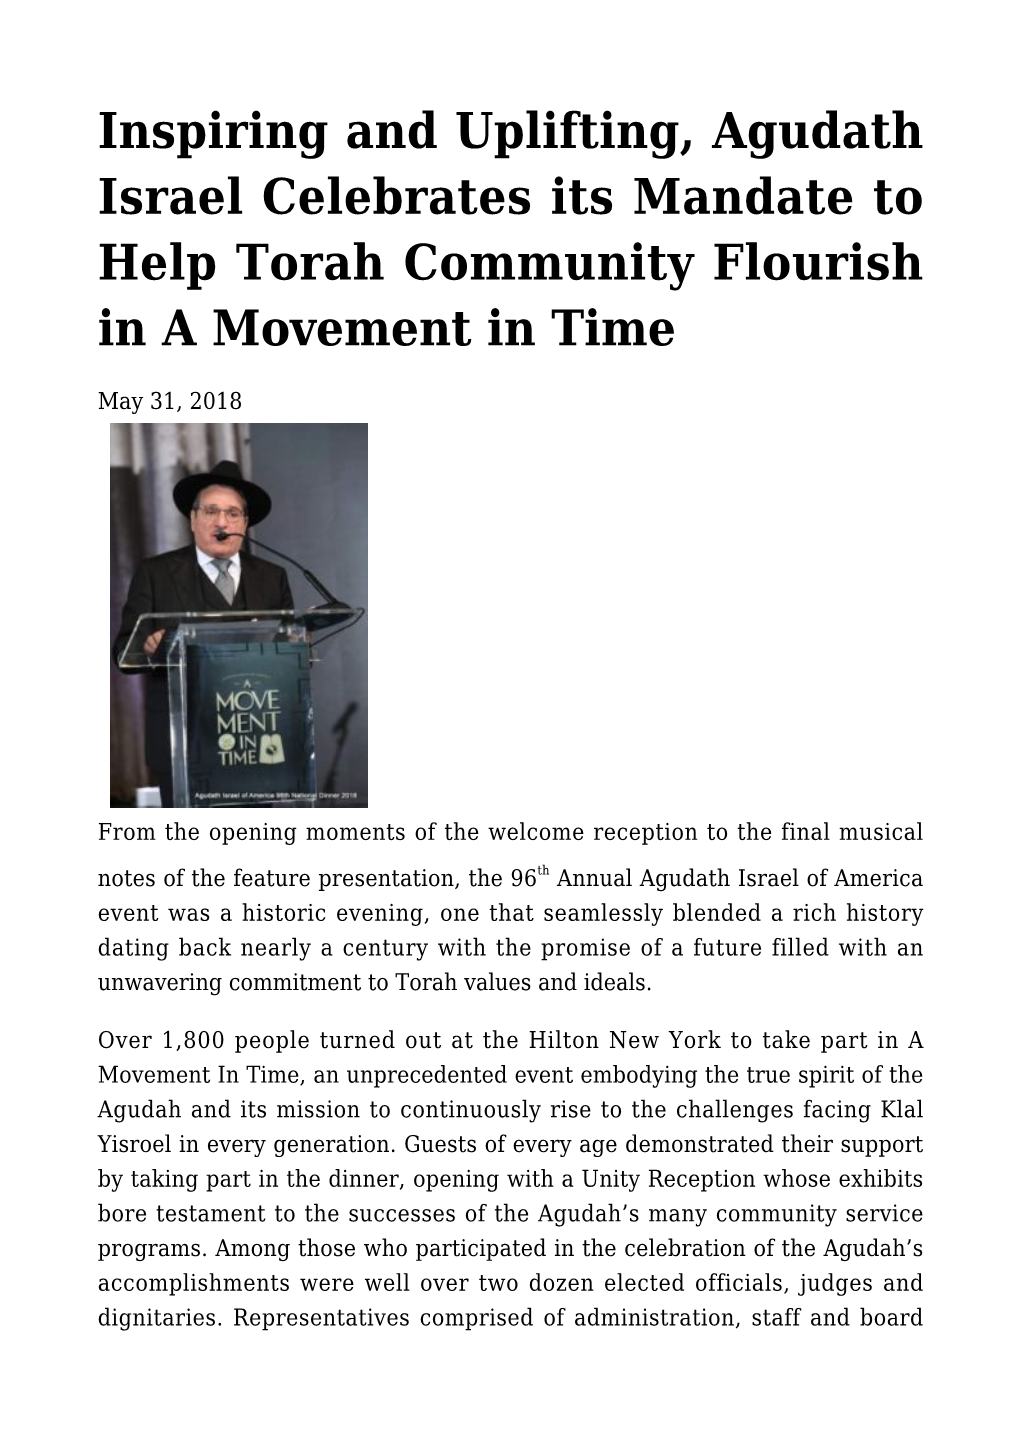 Inspiring and Uplifting, Agudath Israel Celebrates Its Mandate to Help Torah Community Flourish in a Movement in Time